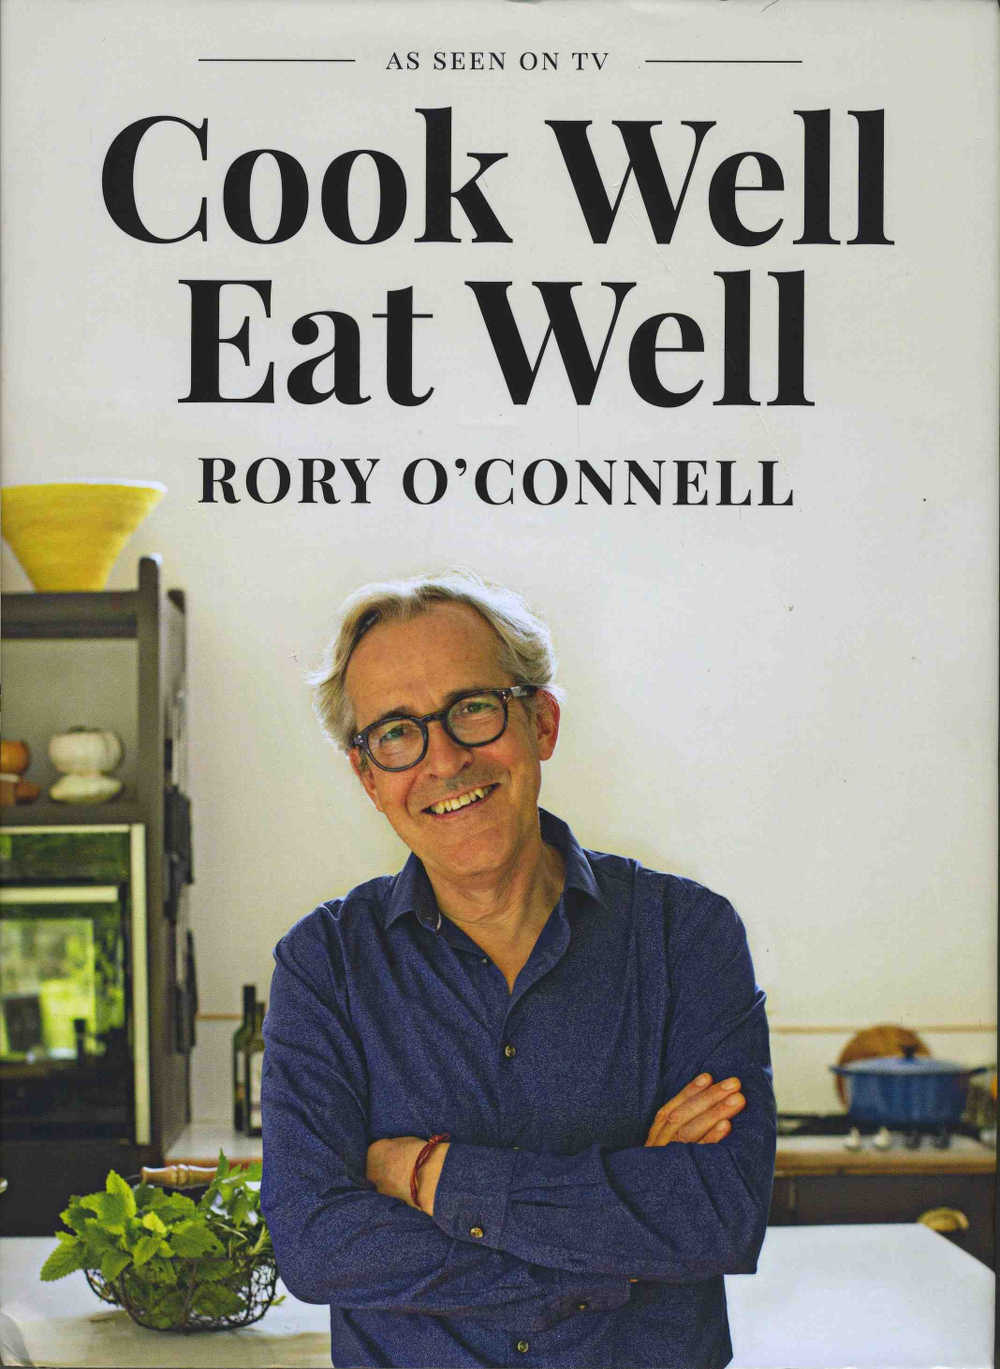 Cook Well Eat Well by Rory O'Connell